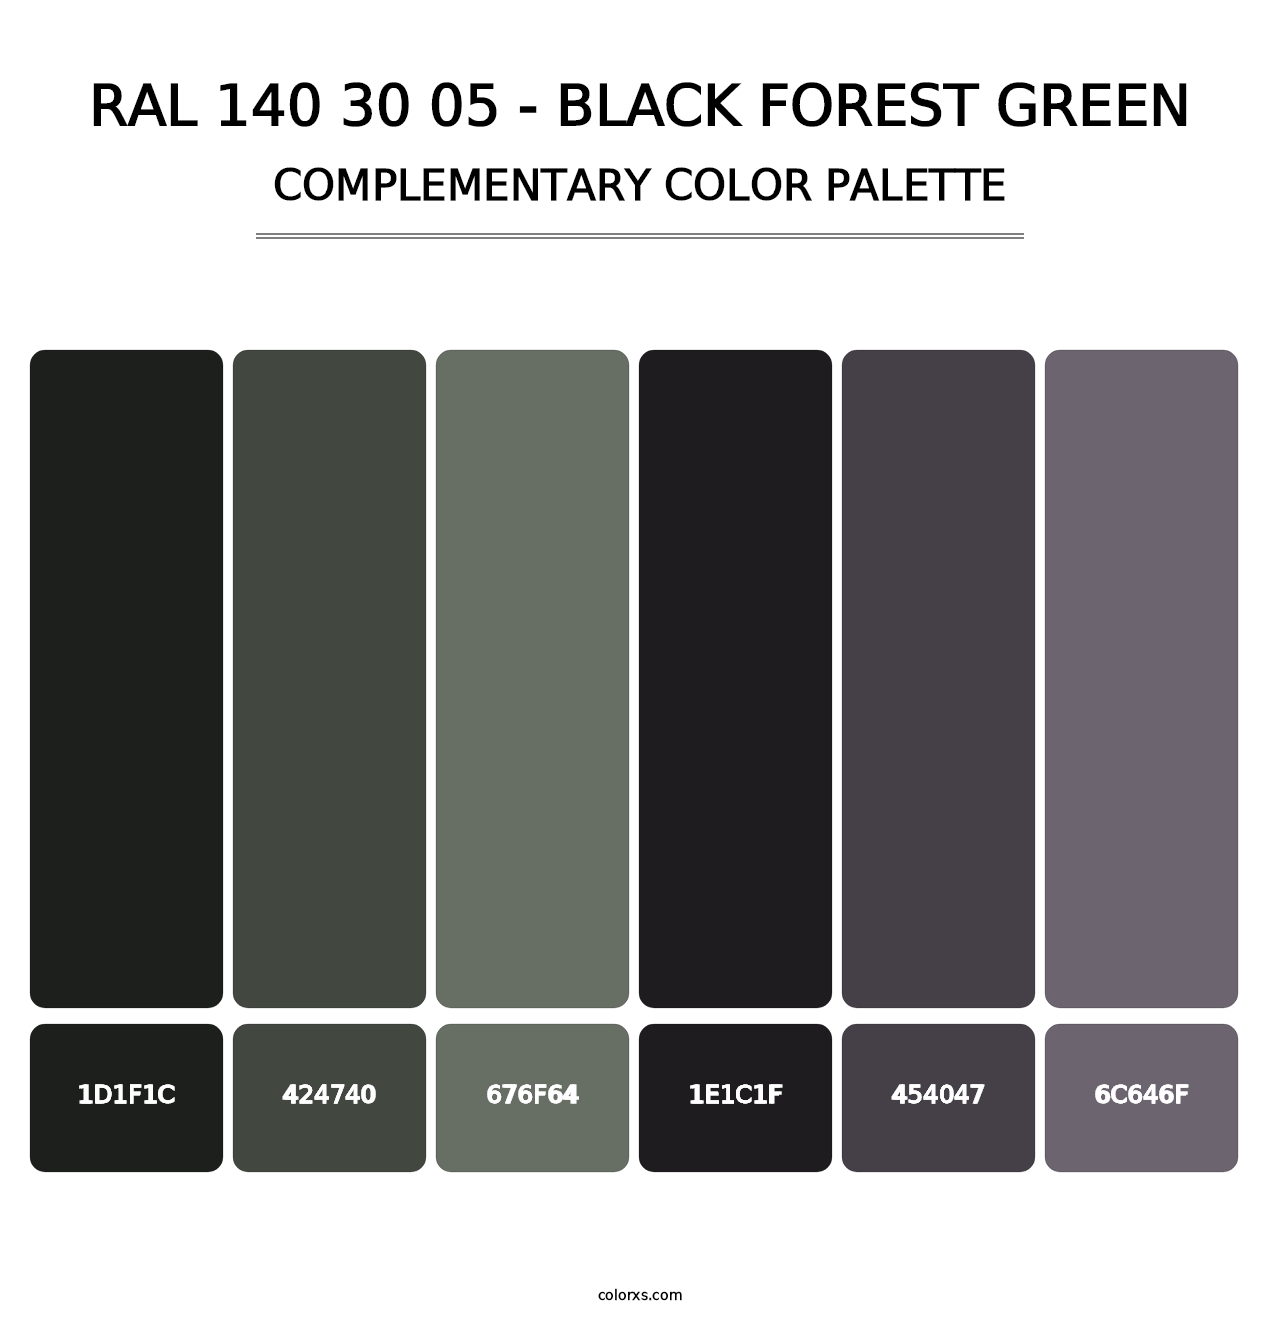 RAL 140 30 05 - Black Forest Green - Complementary Color Palette